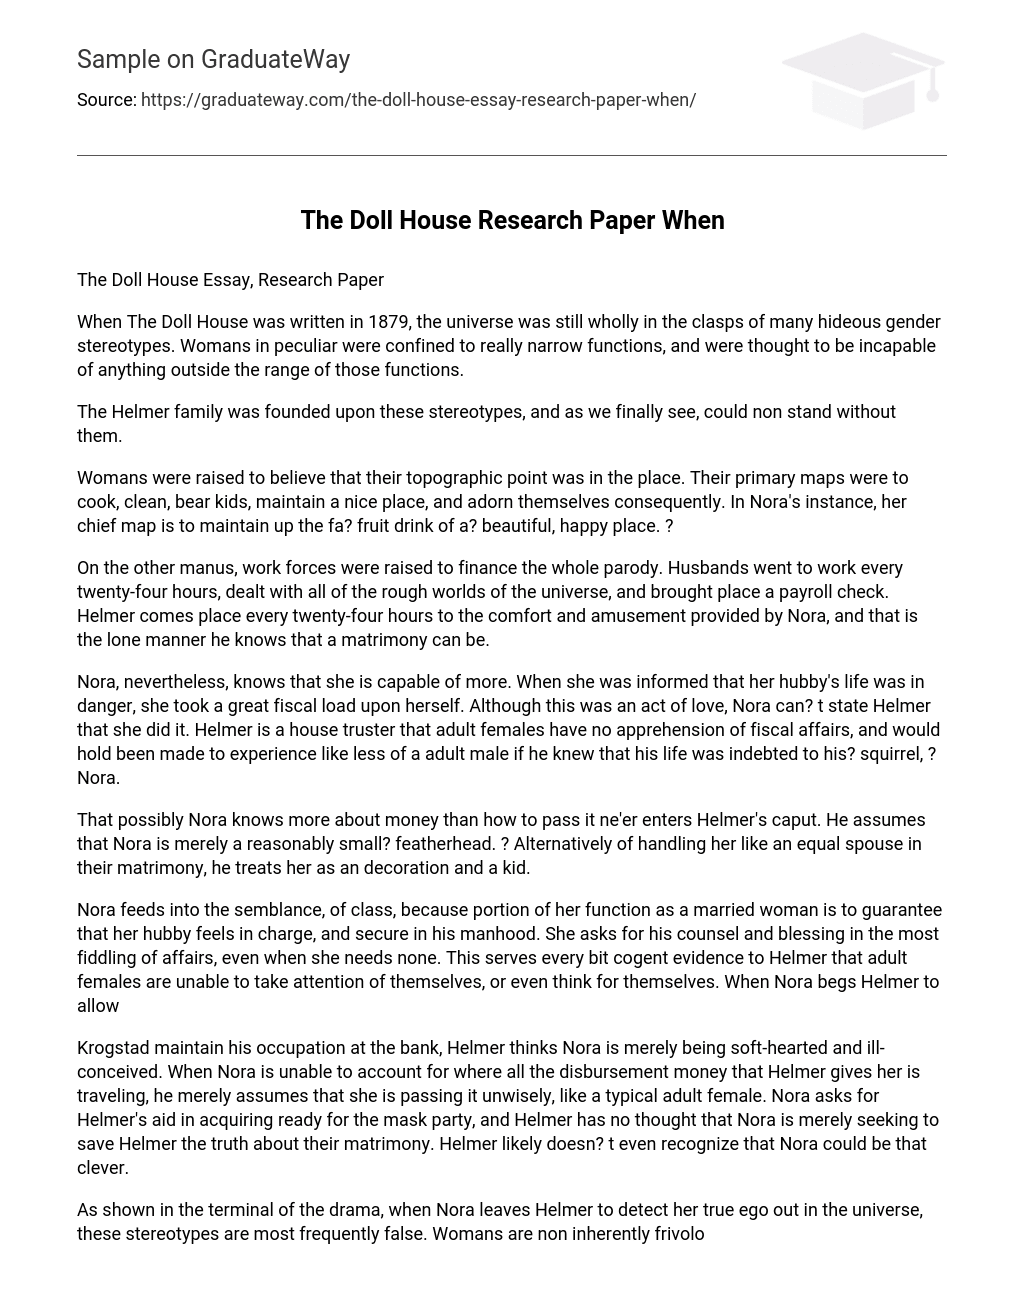 The Doll House Research Paper